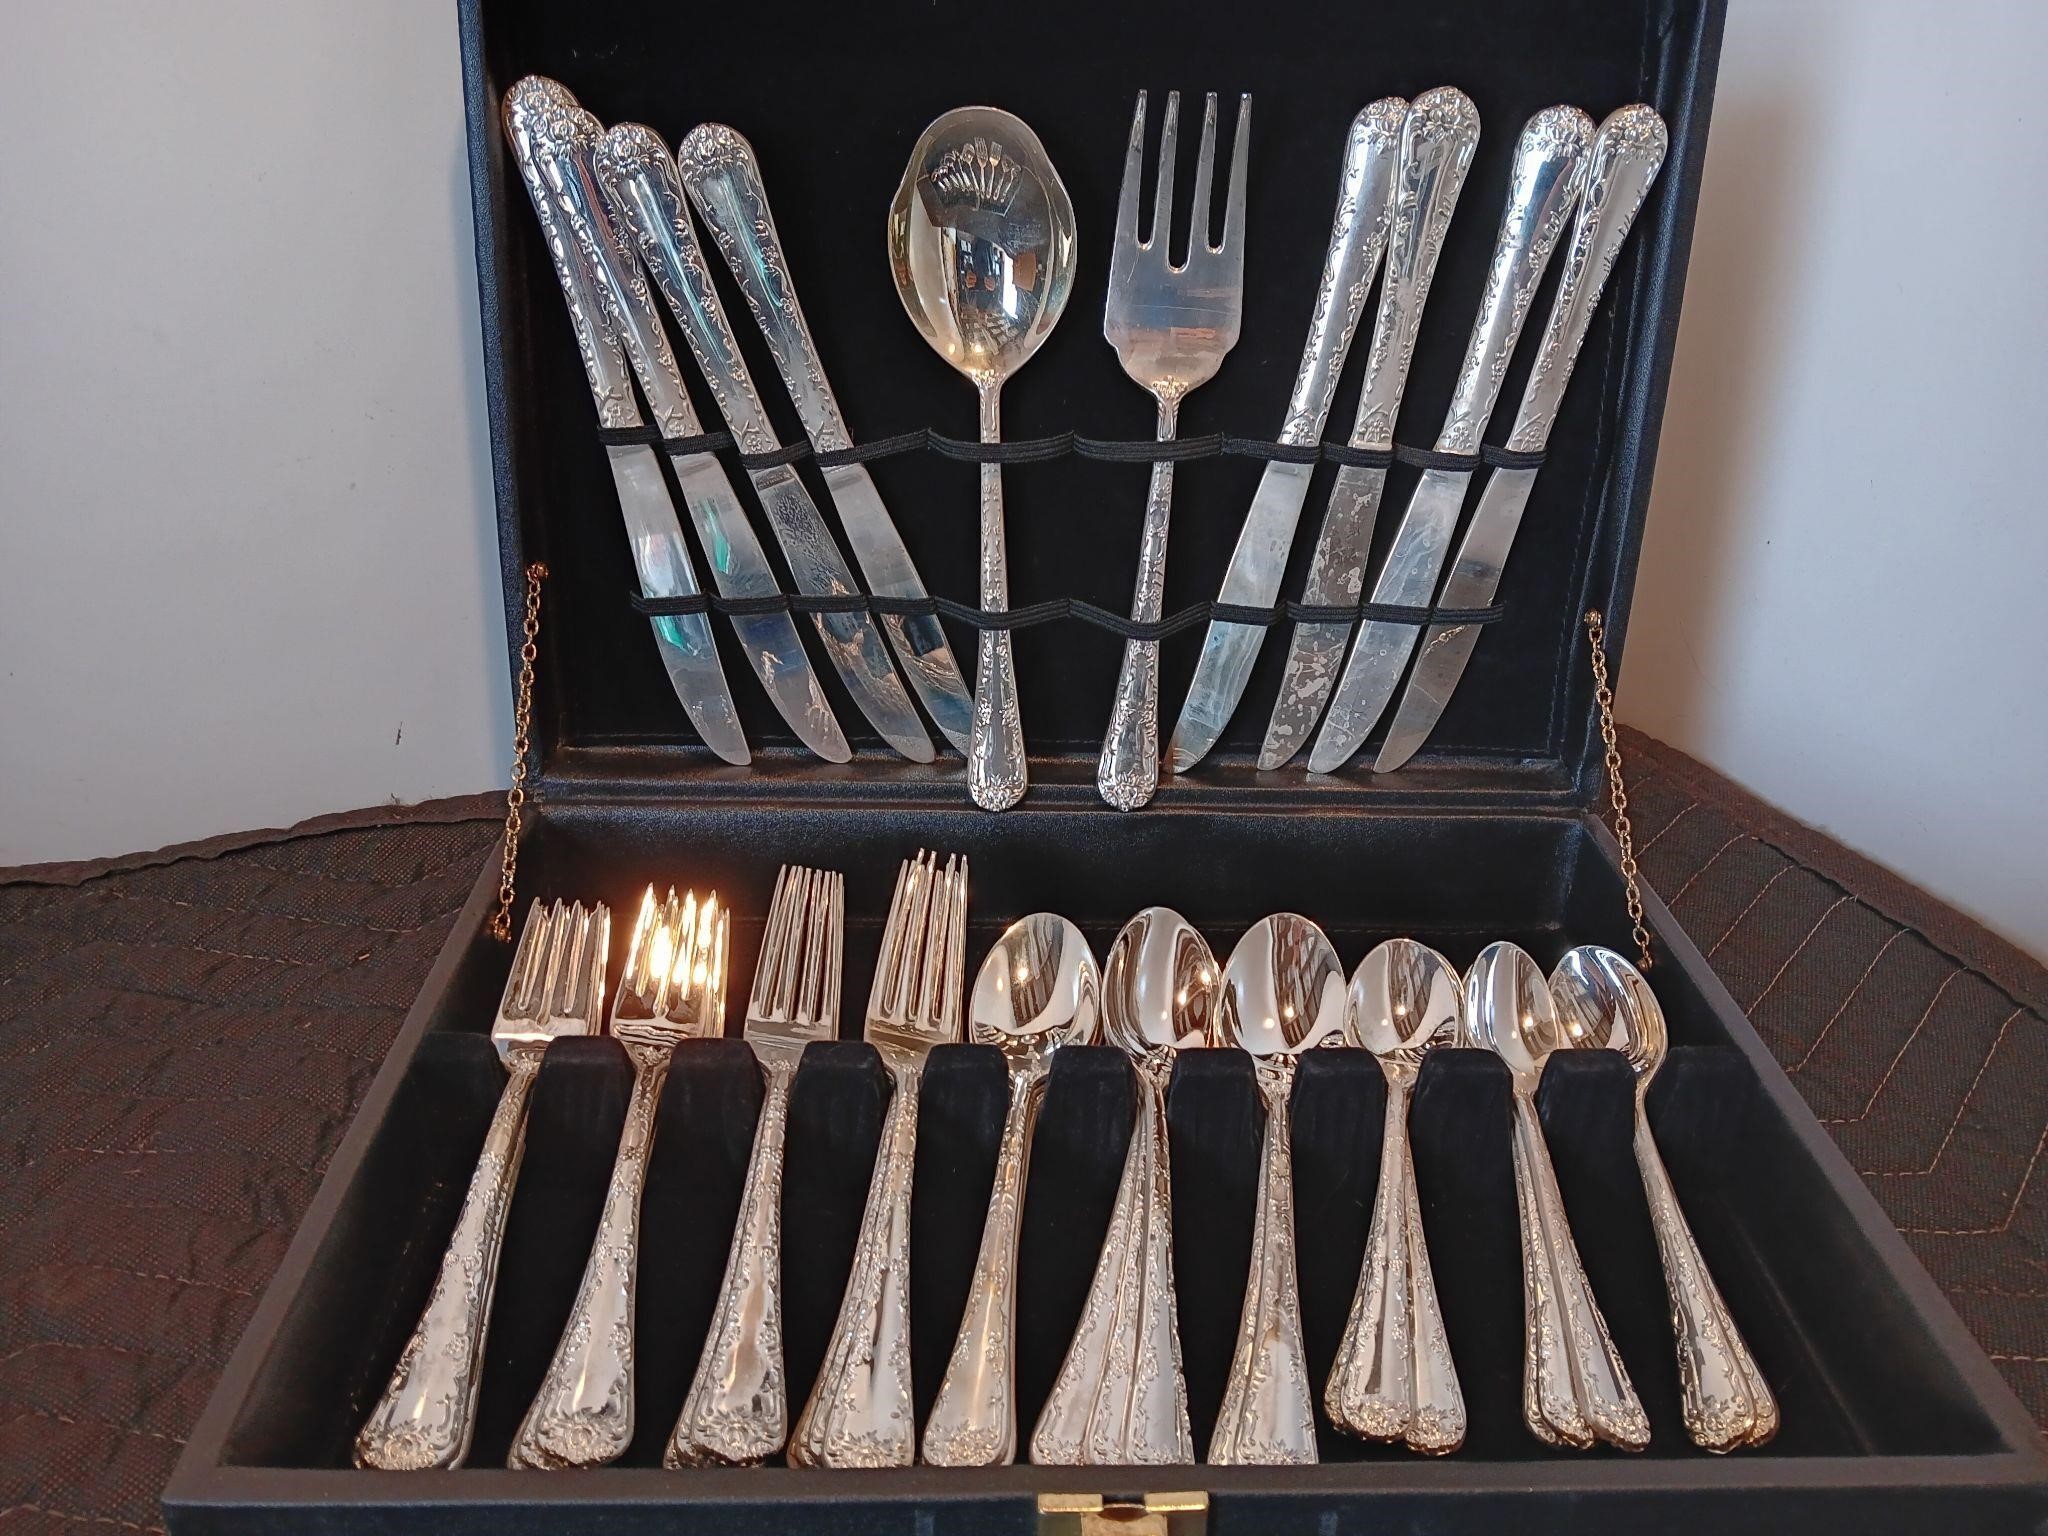 WM. Rogers & Son Silver Plated Flatware Set for 8.